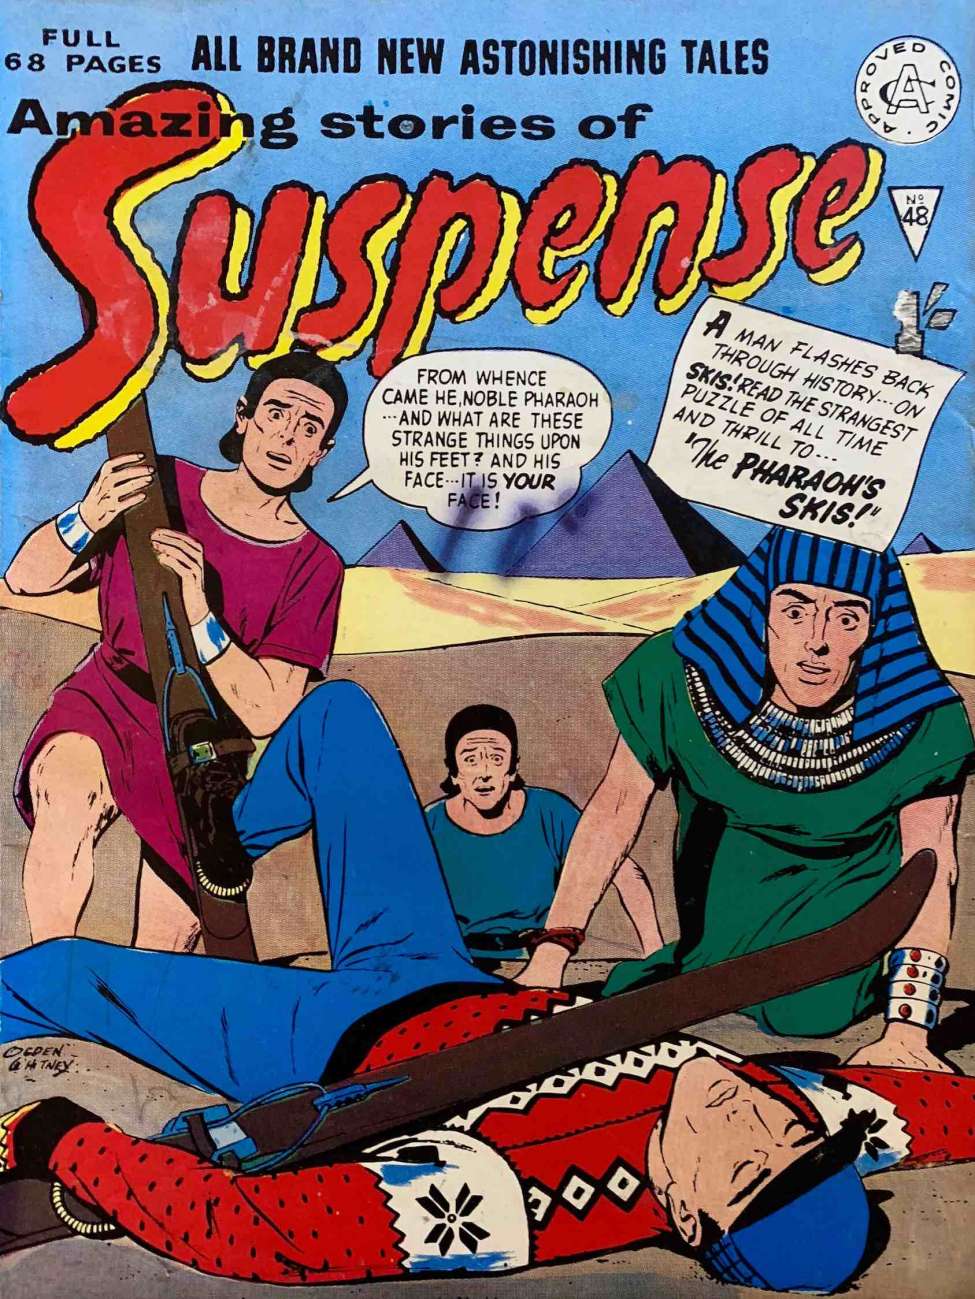 Book Cover For Amazing Stories of Suspense 48